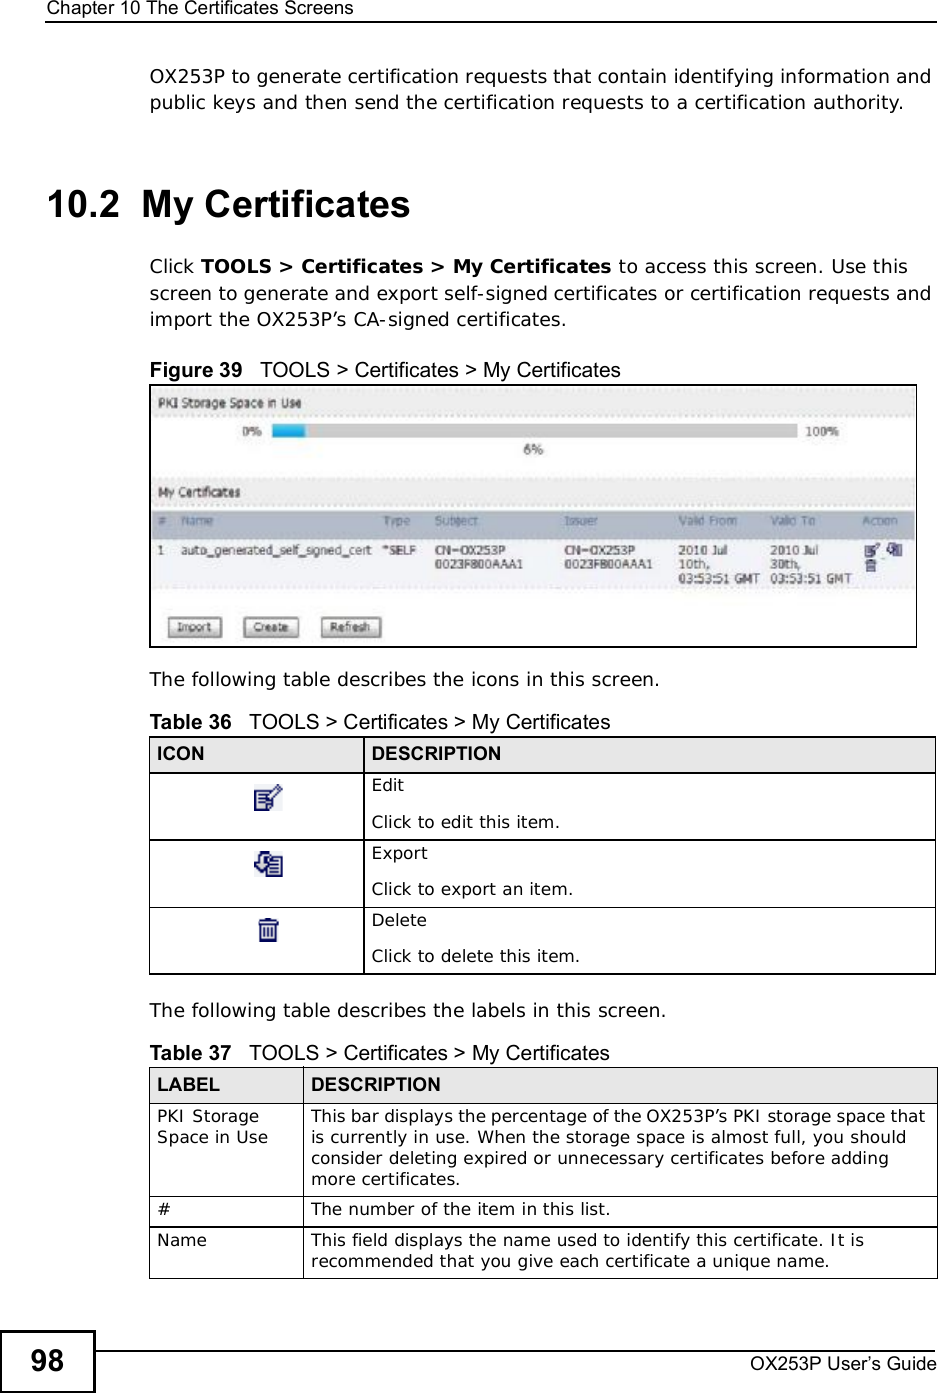 Chapter 10The Certificates ScreensOX253P User’s Guide98OX253P to generate certification requests that contain identifying information and public keys and then send the certification requests to a certification authority. 10.2  My CertificatesClick TOOLS &gt; Certificates &gt; My Certificates to access this screen. Use this screen to generate and export self-signed certificates or certification requests and import the OX253P’s CA-signed certificates.Figure 39   TOOLS &gt; Certificates &gt; My Certificates      The following table describes the icons in this screen.The following table describes the labels in this screen. Table 36   TOOLS &gt; Certificates &gt; My CertificatesICON DESCRIPTIONEditClick to edit this item.ExportClick to export an item.DeleteClick to delete this item.Table 37   TOOLS &gt; Certificates &gt; My CertificatesLABEL DESCRIPTIONPKI Storage Space in Use This bar displays the percentage of the OX253P’s PKI storage space that is currently in use. When the storage space is almost full, you should consider deleting expired or unnecessary certificates before adding more certificates.#The number of the item in this list.NameThis field displays the name used to identify this certificate. It is recommended that you give each certificate a unique name. 